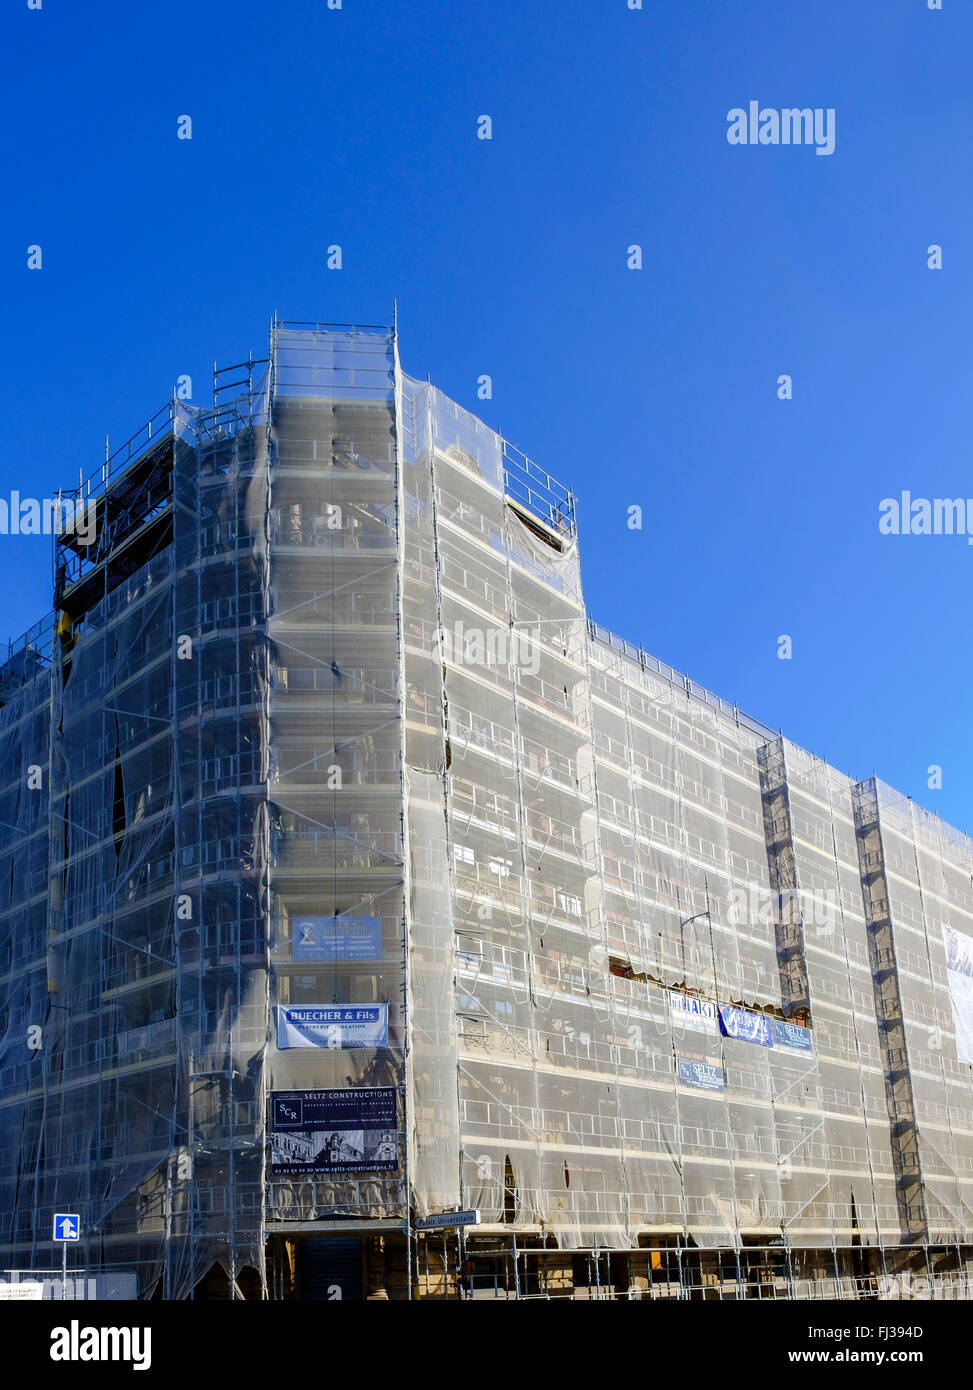 Scaffoldings, safety nets, facelift, Gallia student residence building undergoing renovation, Neustadt district, Strasbourg, Alsace, France, Europe, Stock Photo